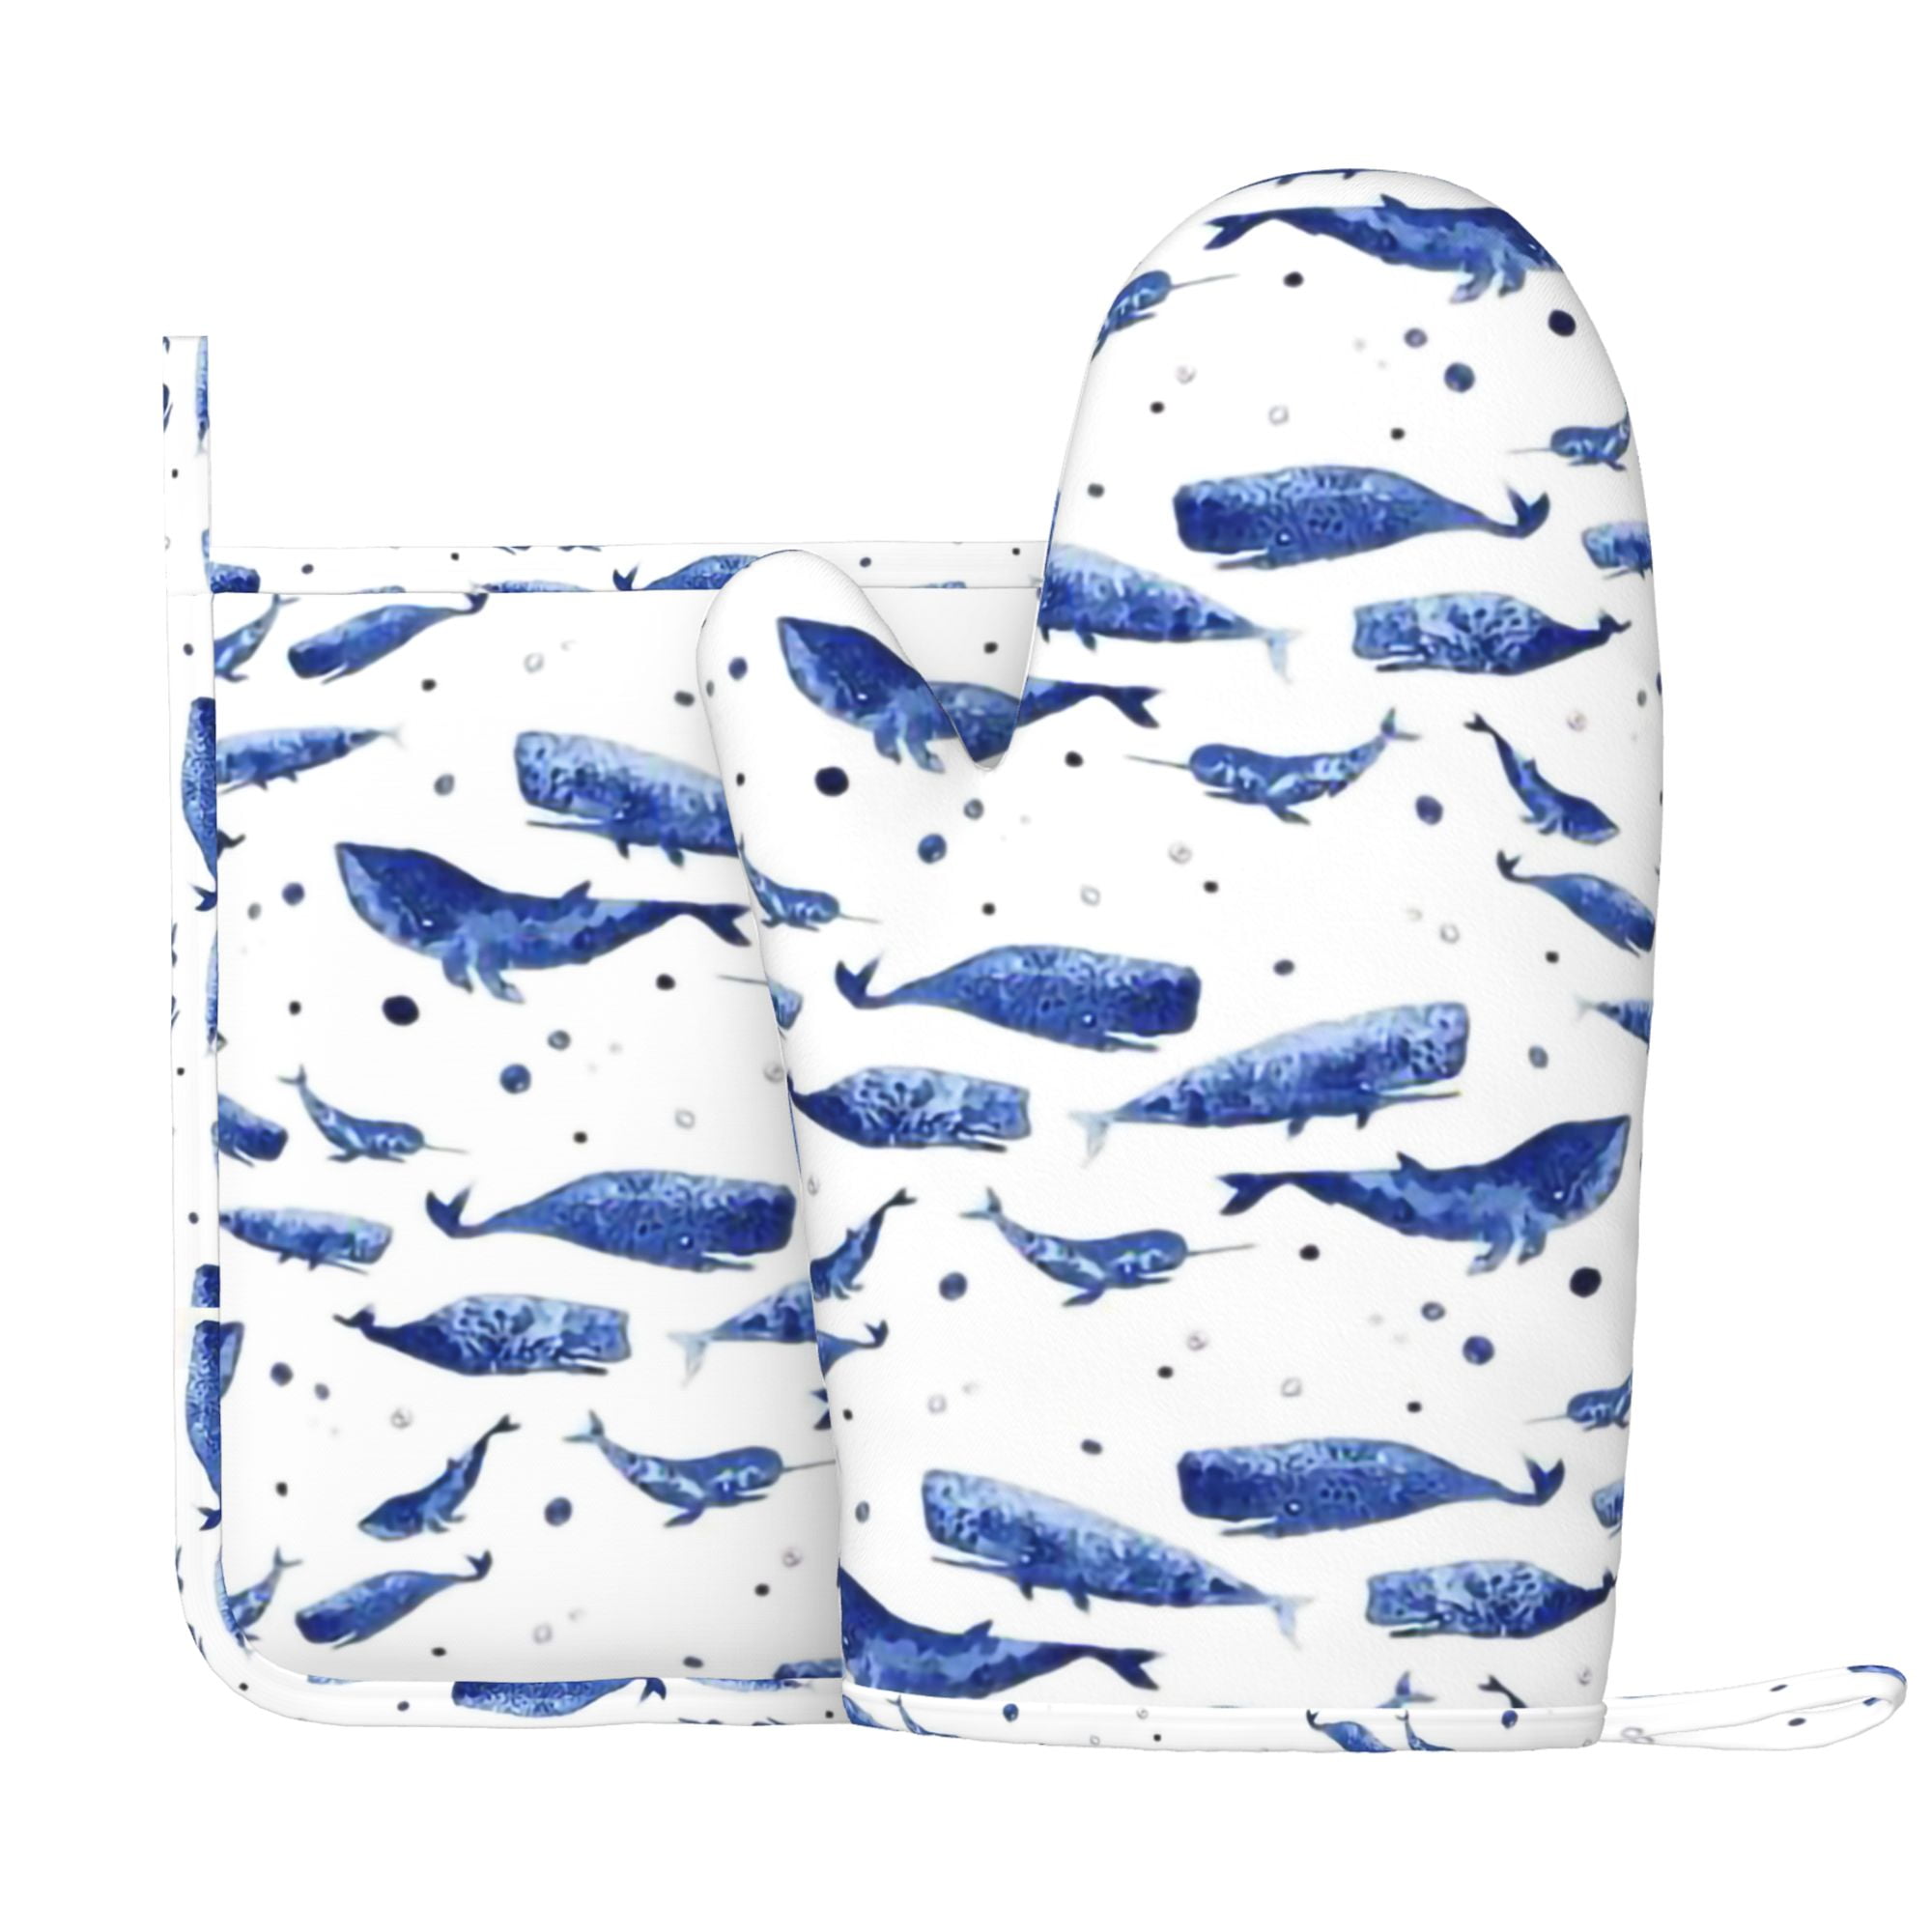 Deep-Sea Fish Oven Microwave Mitts Cartoon Fish Shape Cotton Oven Mitts  Anti-Heat Baking Cooking Grilling Gloves Recycled Kitchen Oven Gloves Pot